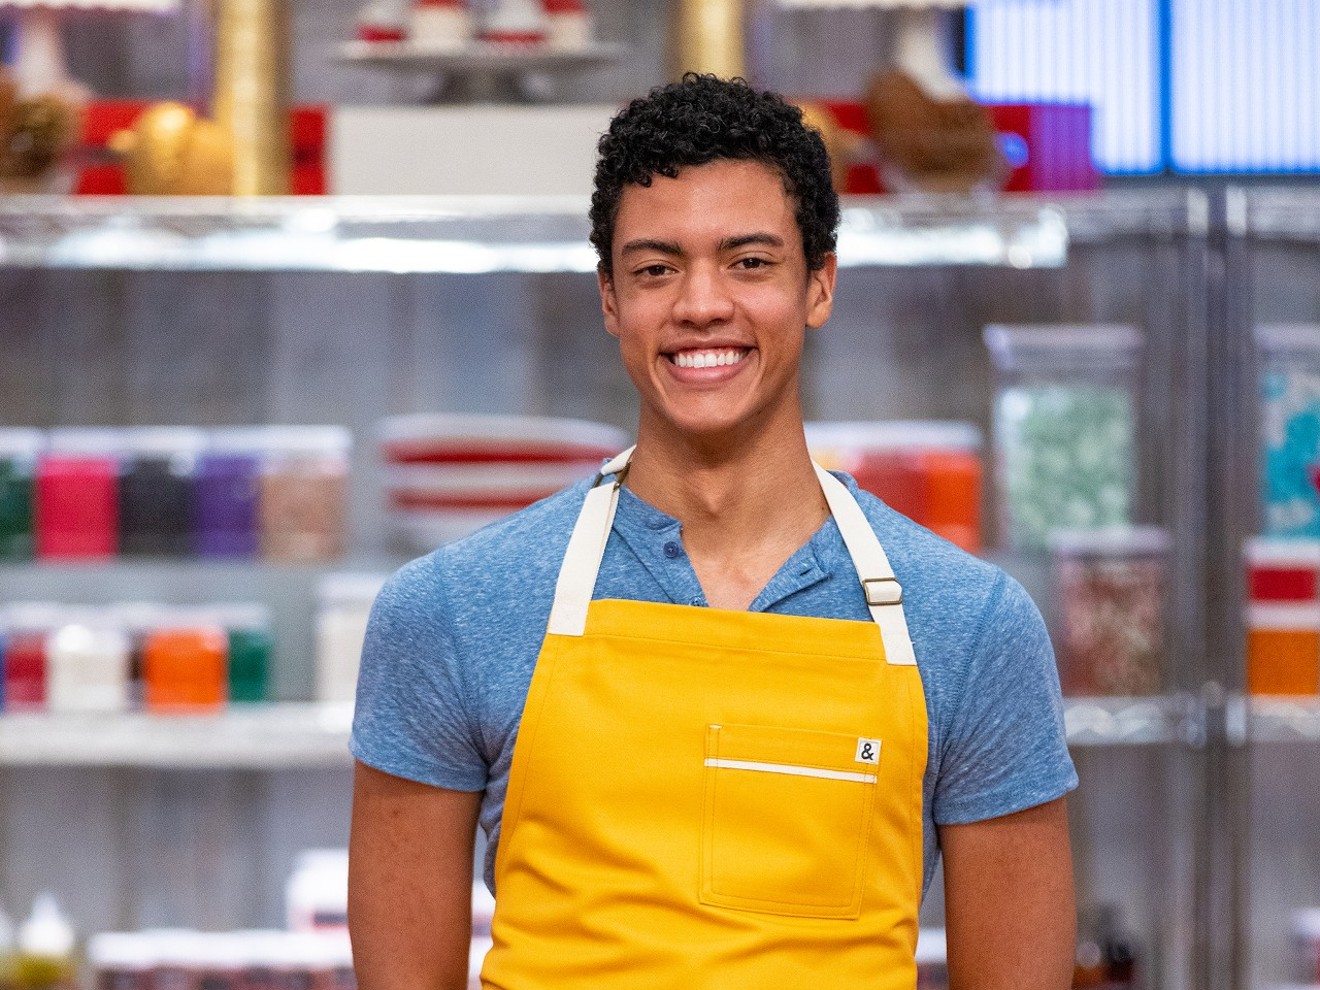 “Having the opportunity to be on Food Network to participate like this is something I’ve wanted to do my entire life,” says Aaron Davis, a cake decorator for Abbie Cakes Sweet Kitchen who is competing on season nine of Food Network's Holiday Baking Championship.